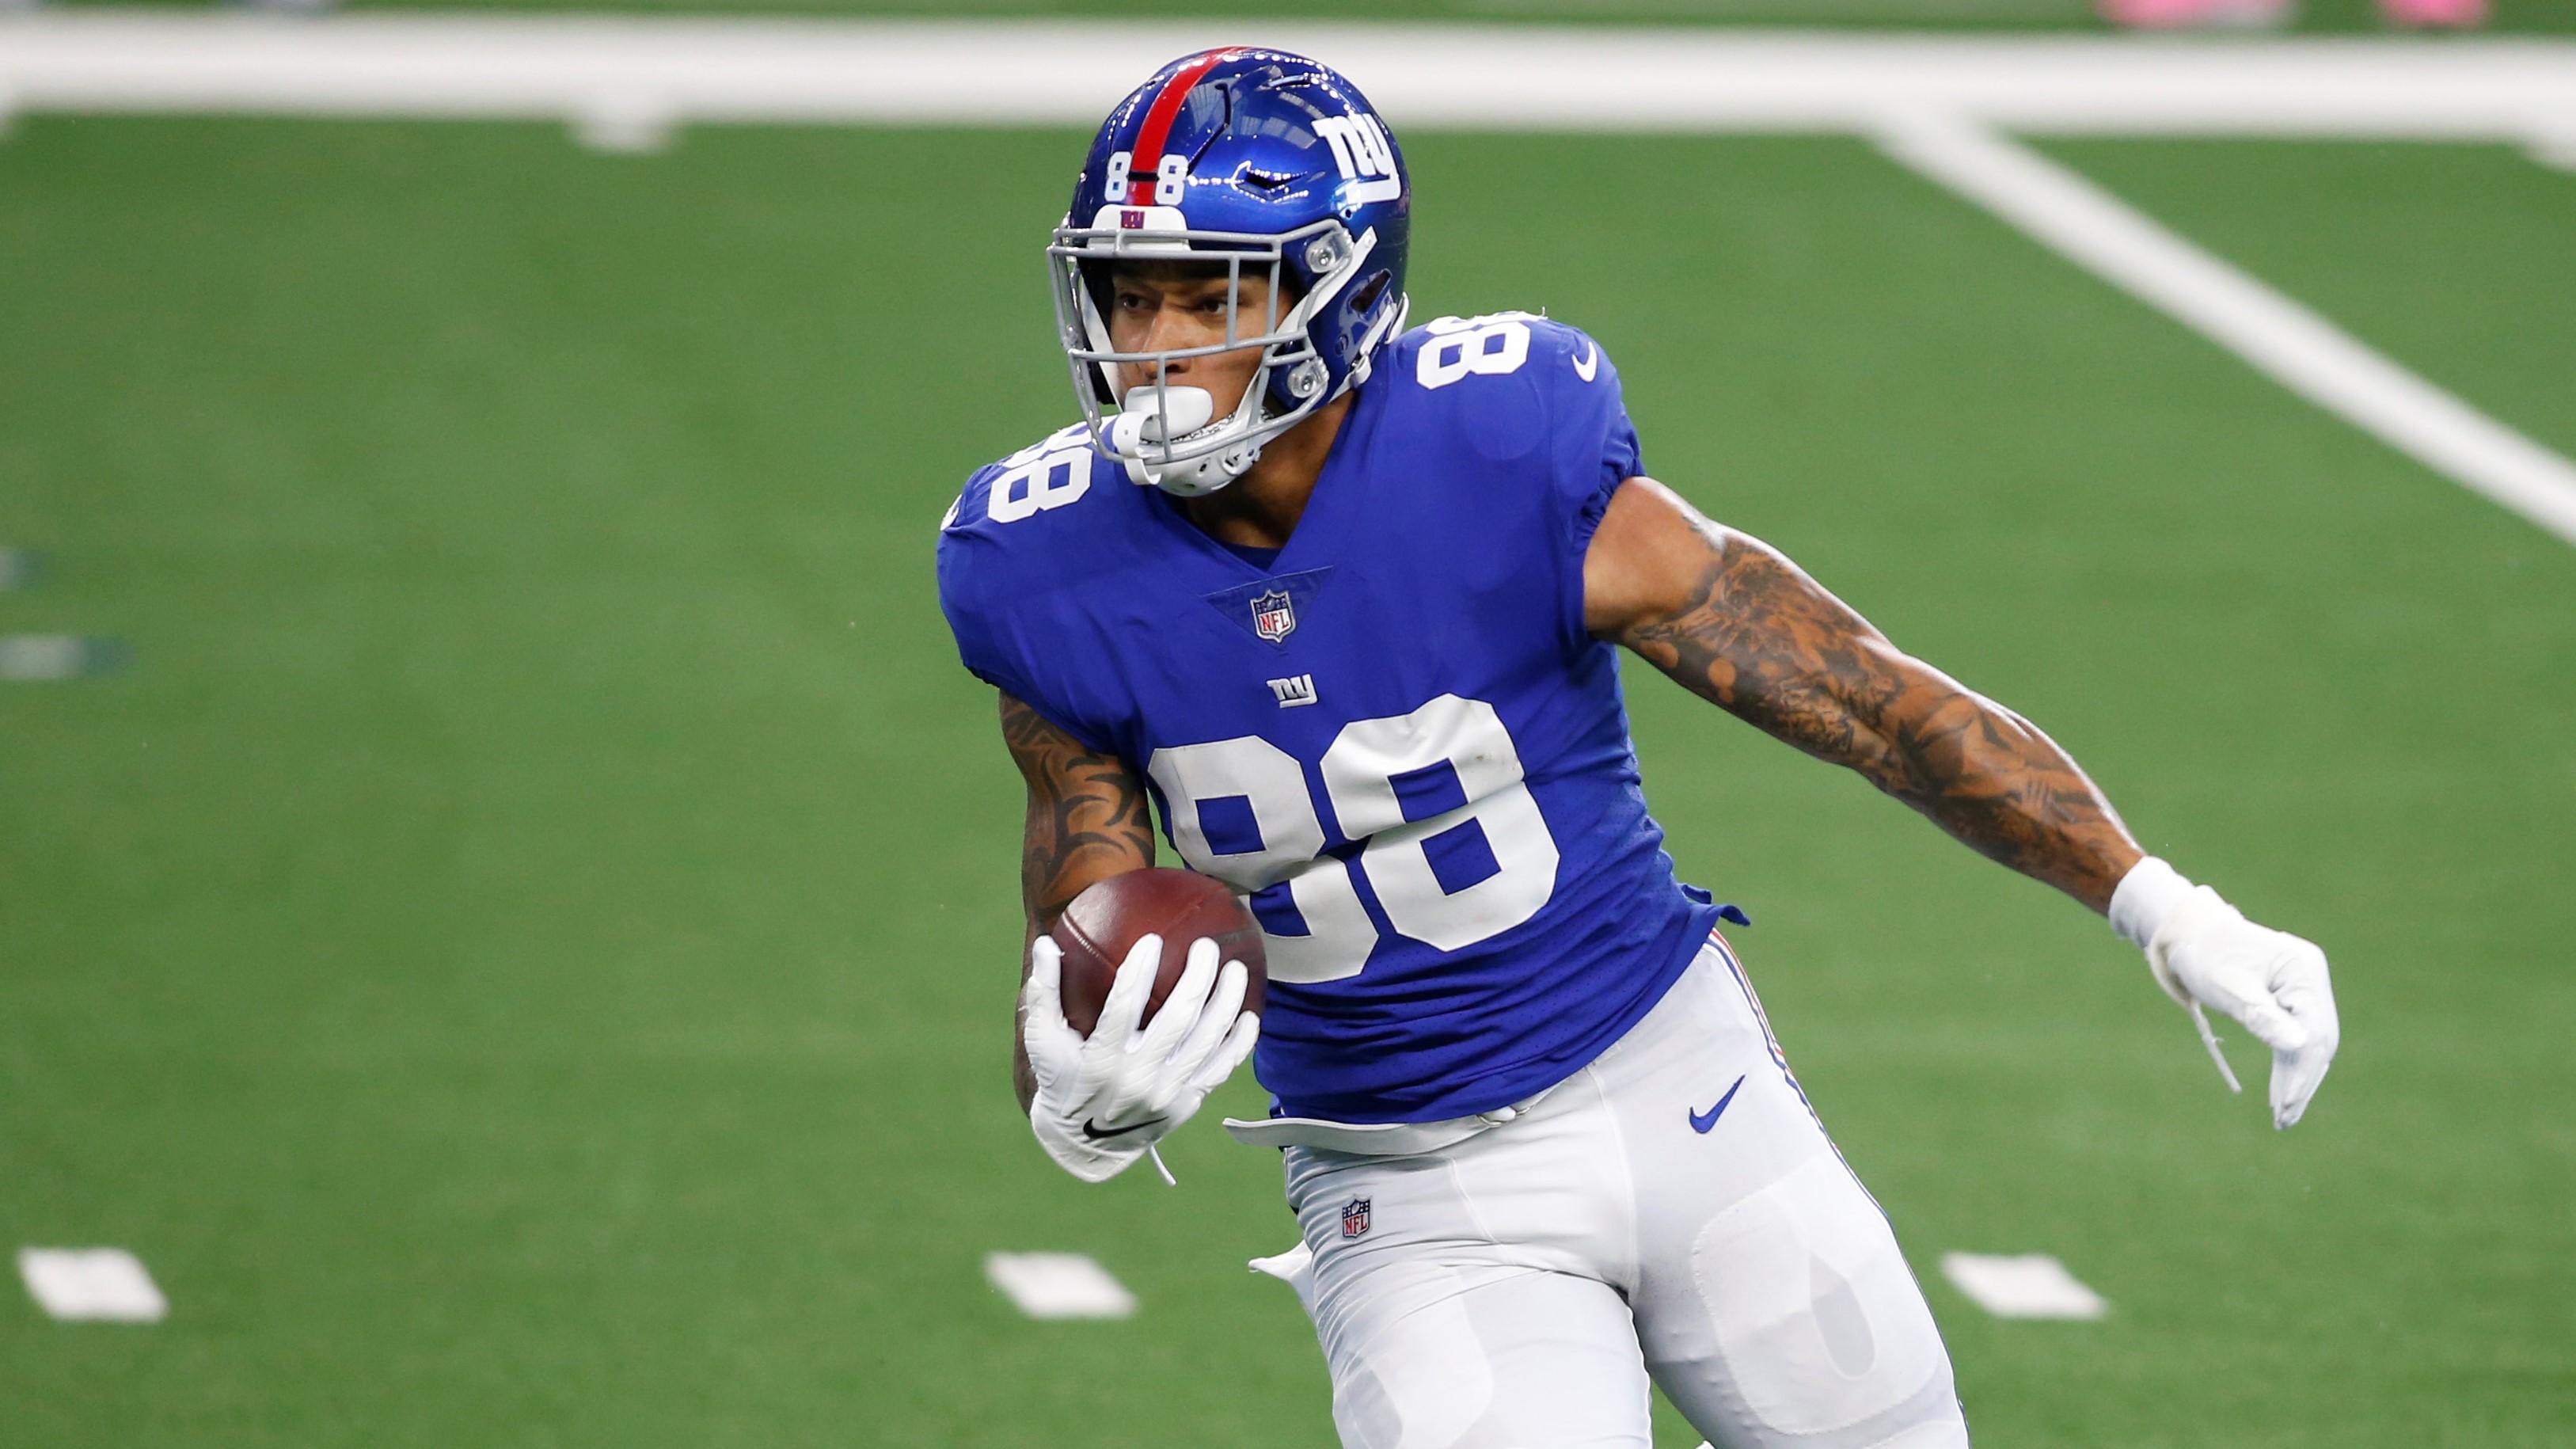 Oct 11, 2020; Arlington, Texas, USA; New York Giants tight end Evan Engram (88) runs a reverse for a touchdown in the first quarter against the Dallas Cowboys at AT&T Stadium. Mandatory Credit: Tim Heitman-USA TODAY Sports / Tim Heitman-USA TODAY Sports